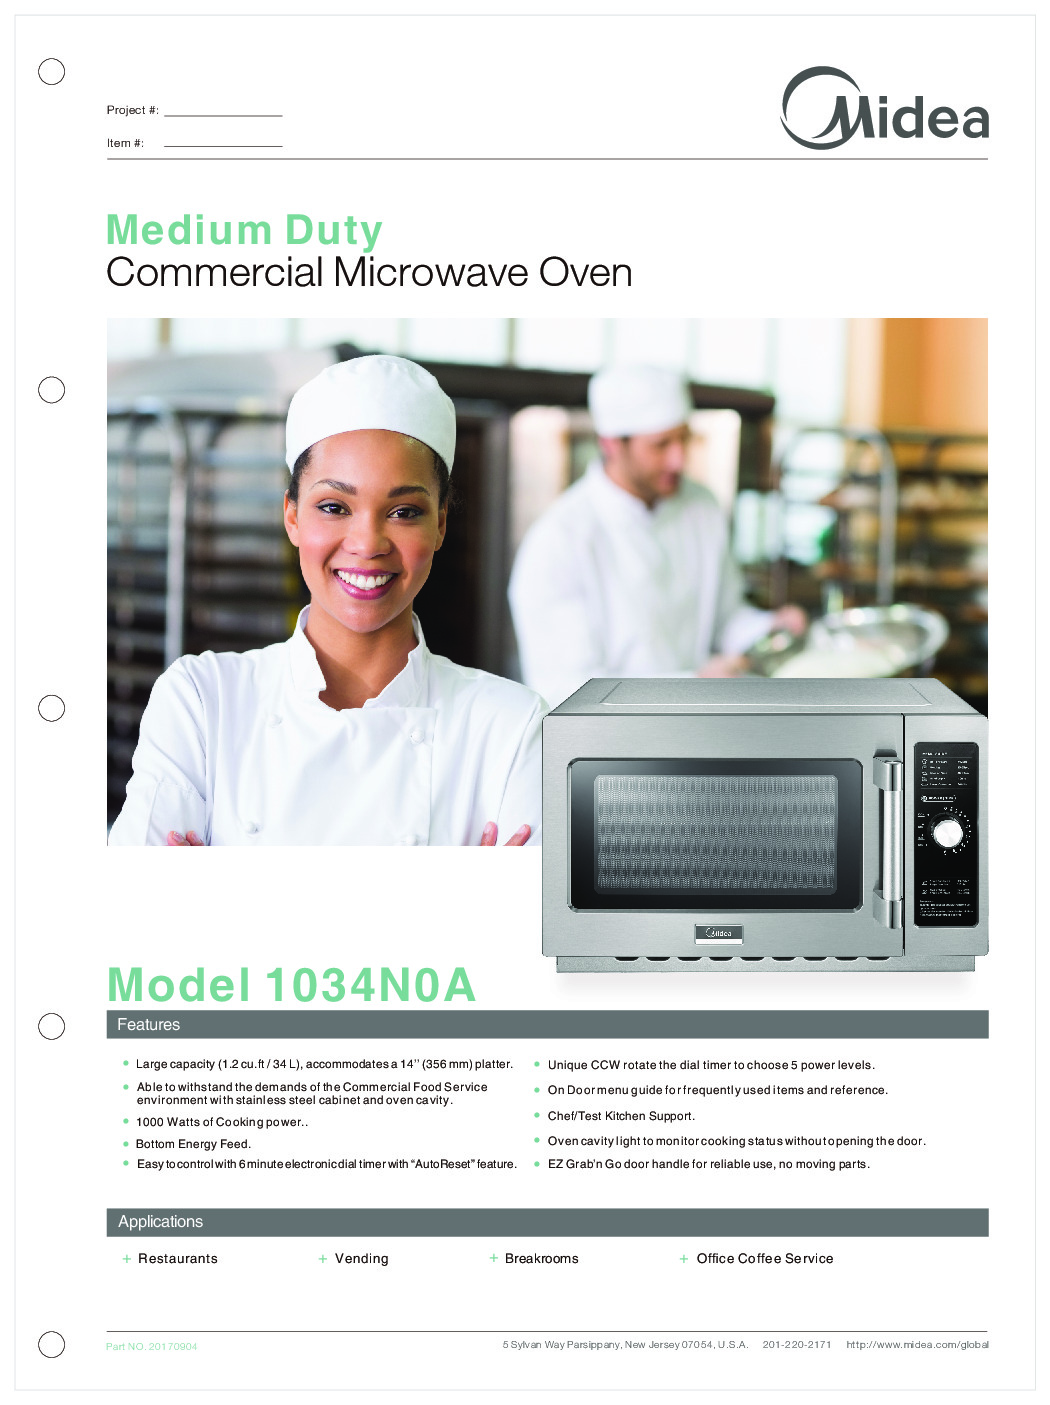 Midea 1034N0A 1000 Watts Medium Duty Dial Commercial Microwave Oven, 1.2 cu. ft. - Open box